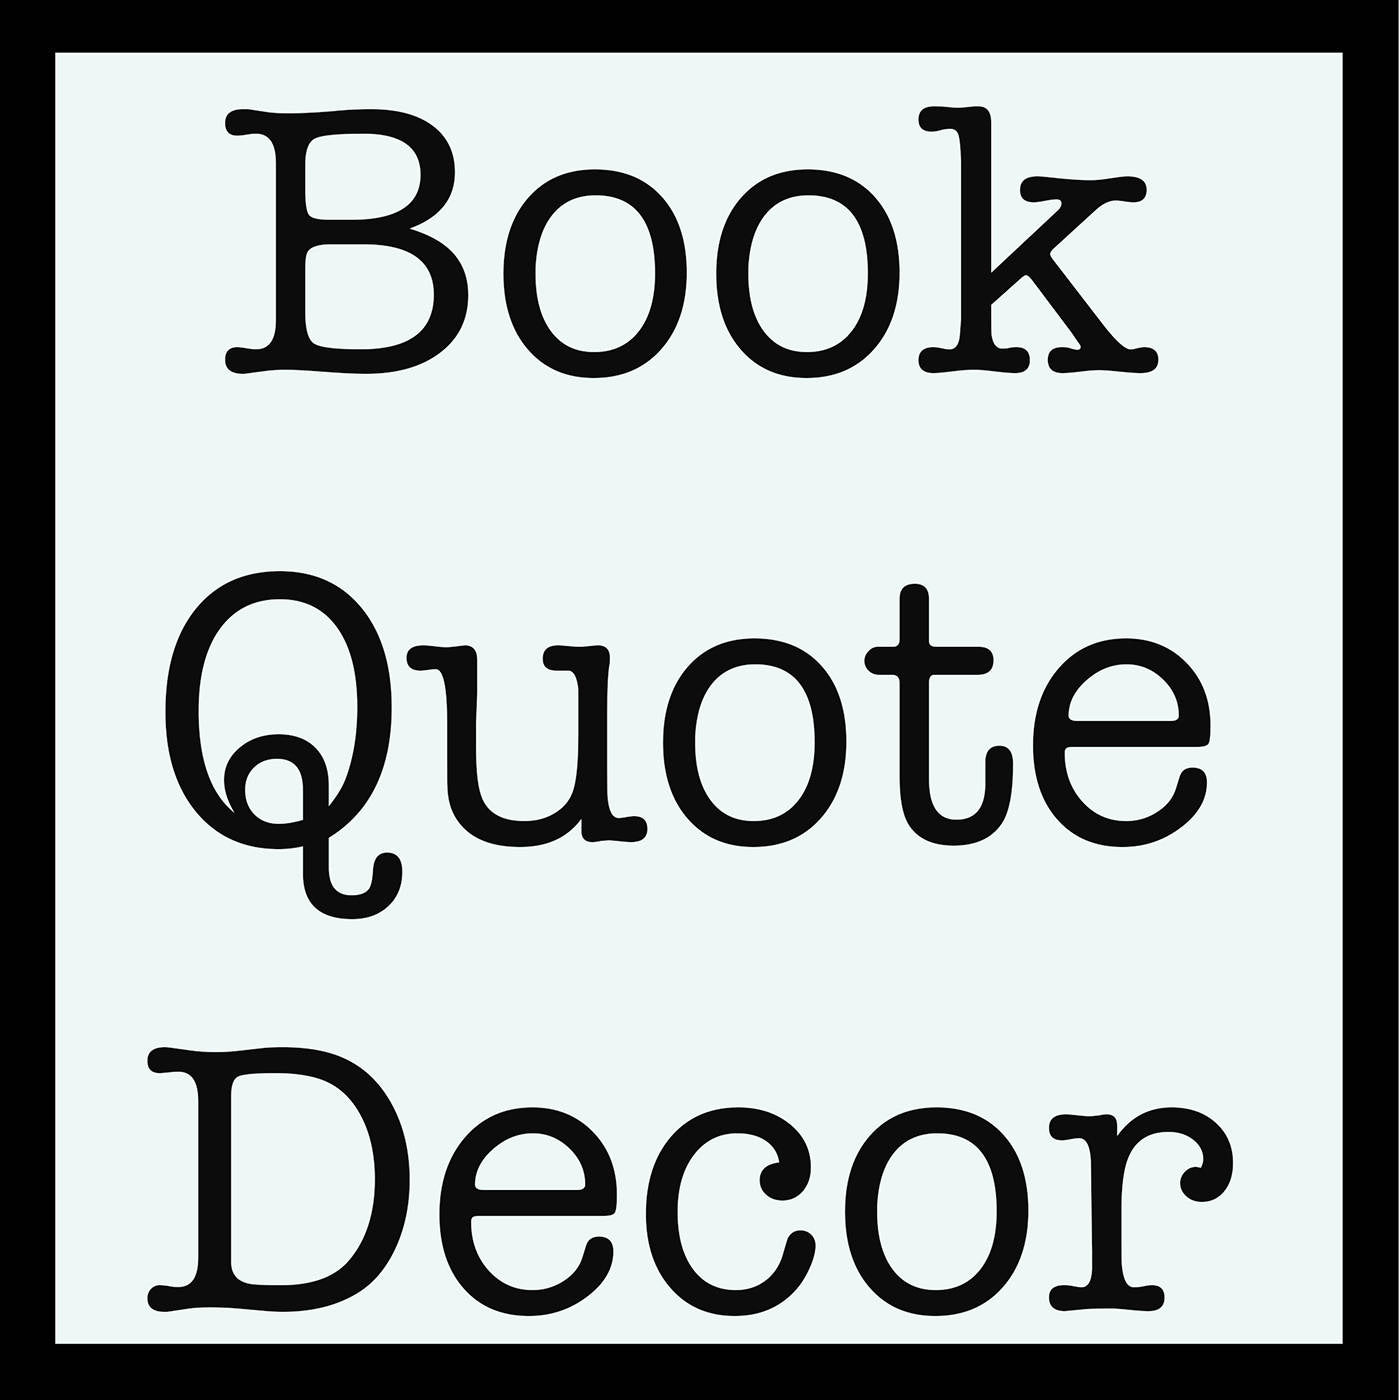 Extra Large Wall Art Book Quote Decor - BookQuoteDecor